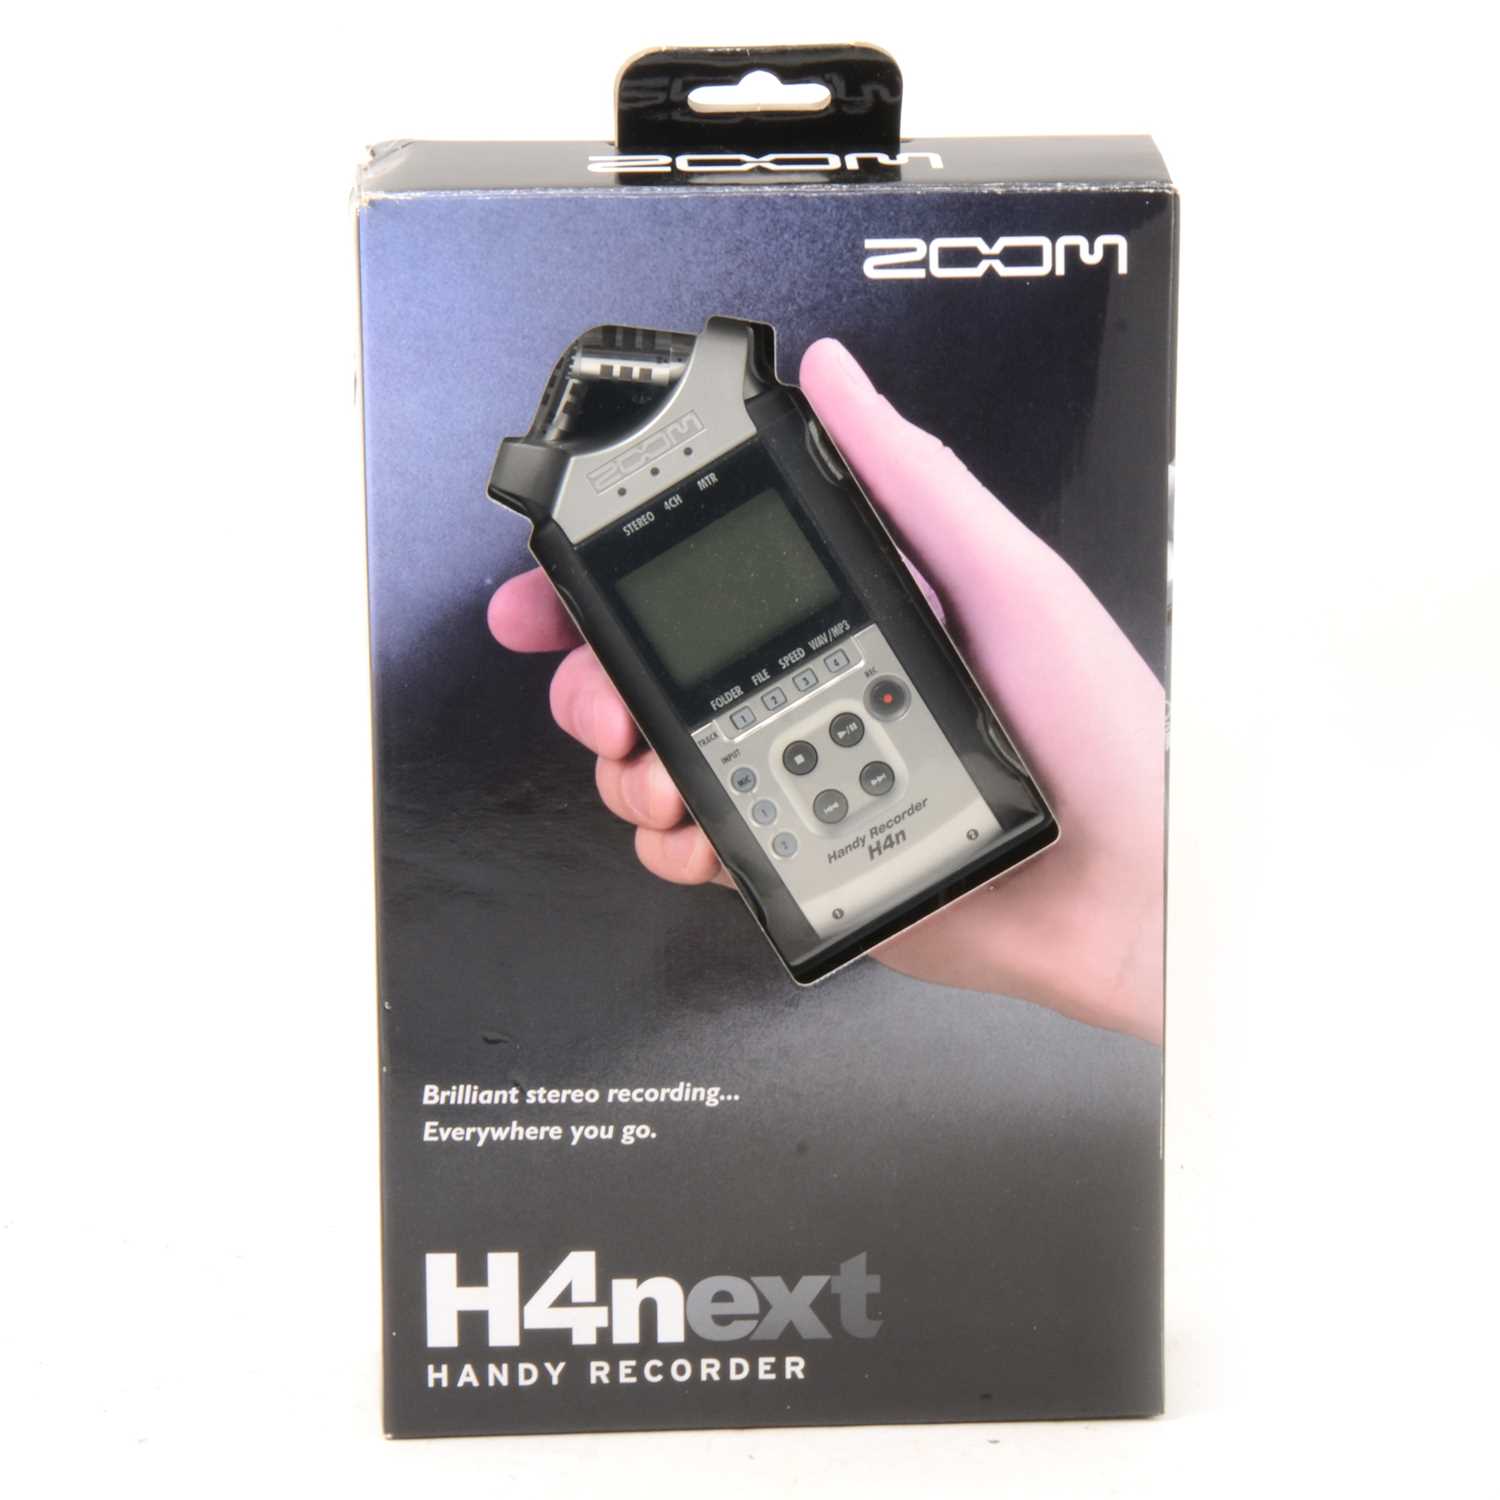 Lot 4 - Zoom H4next Handy recorder, boxed with all parts.